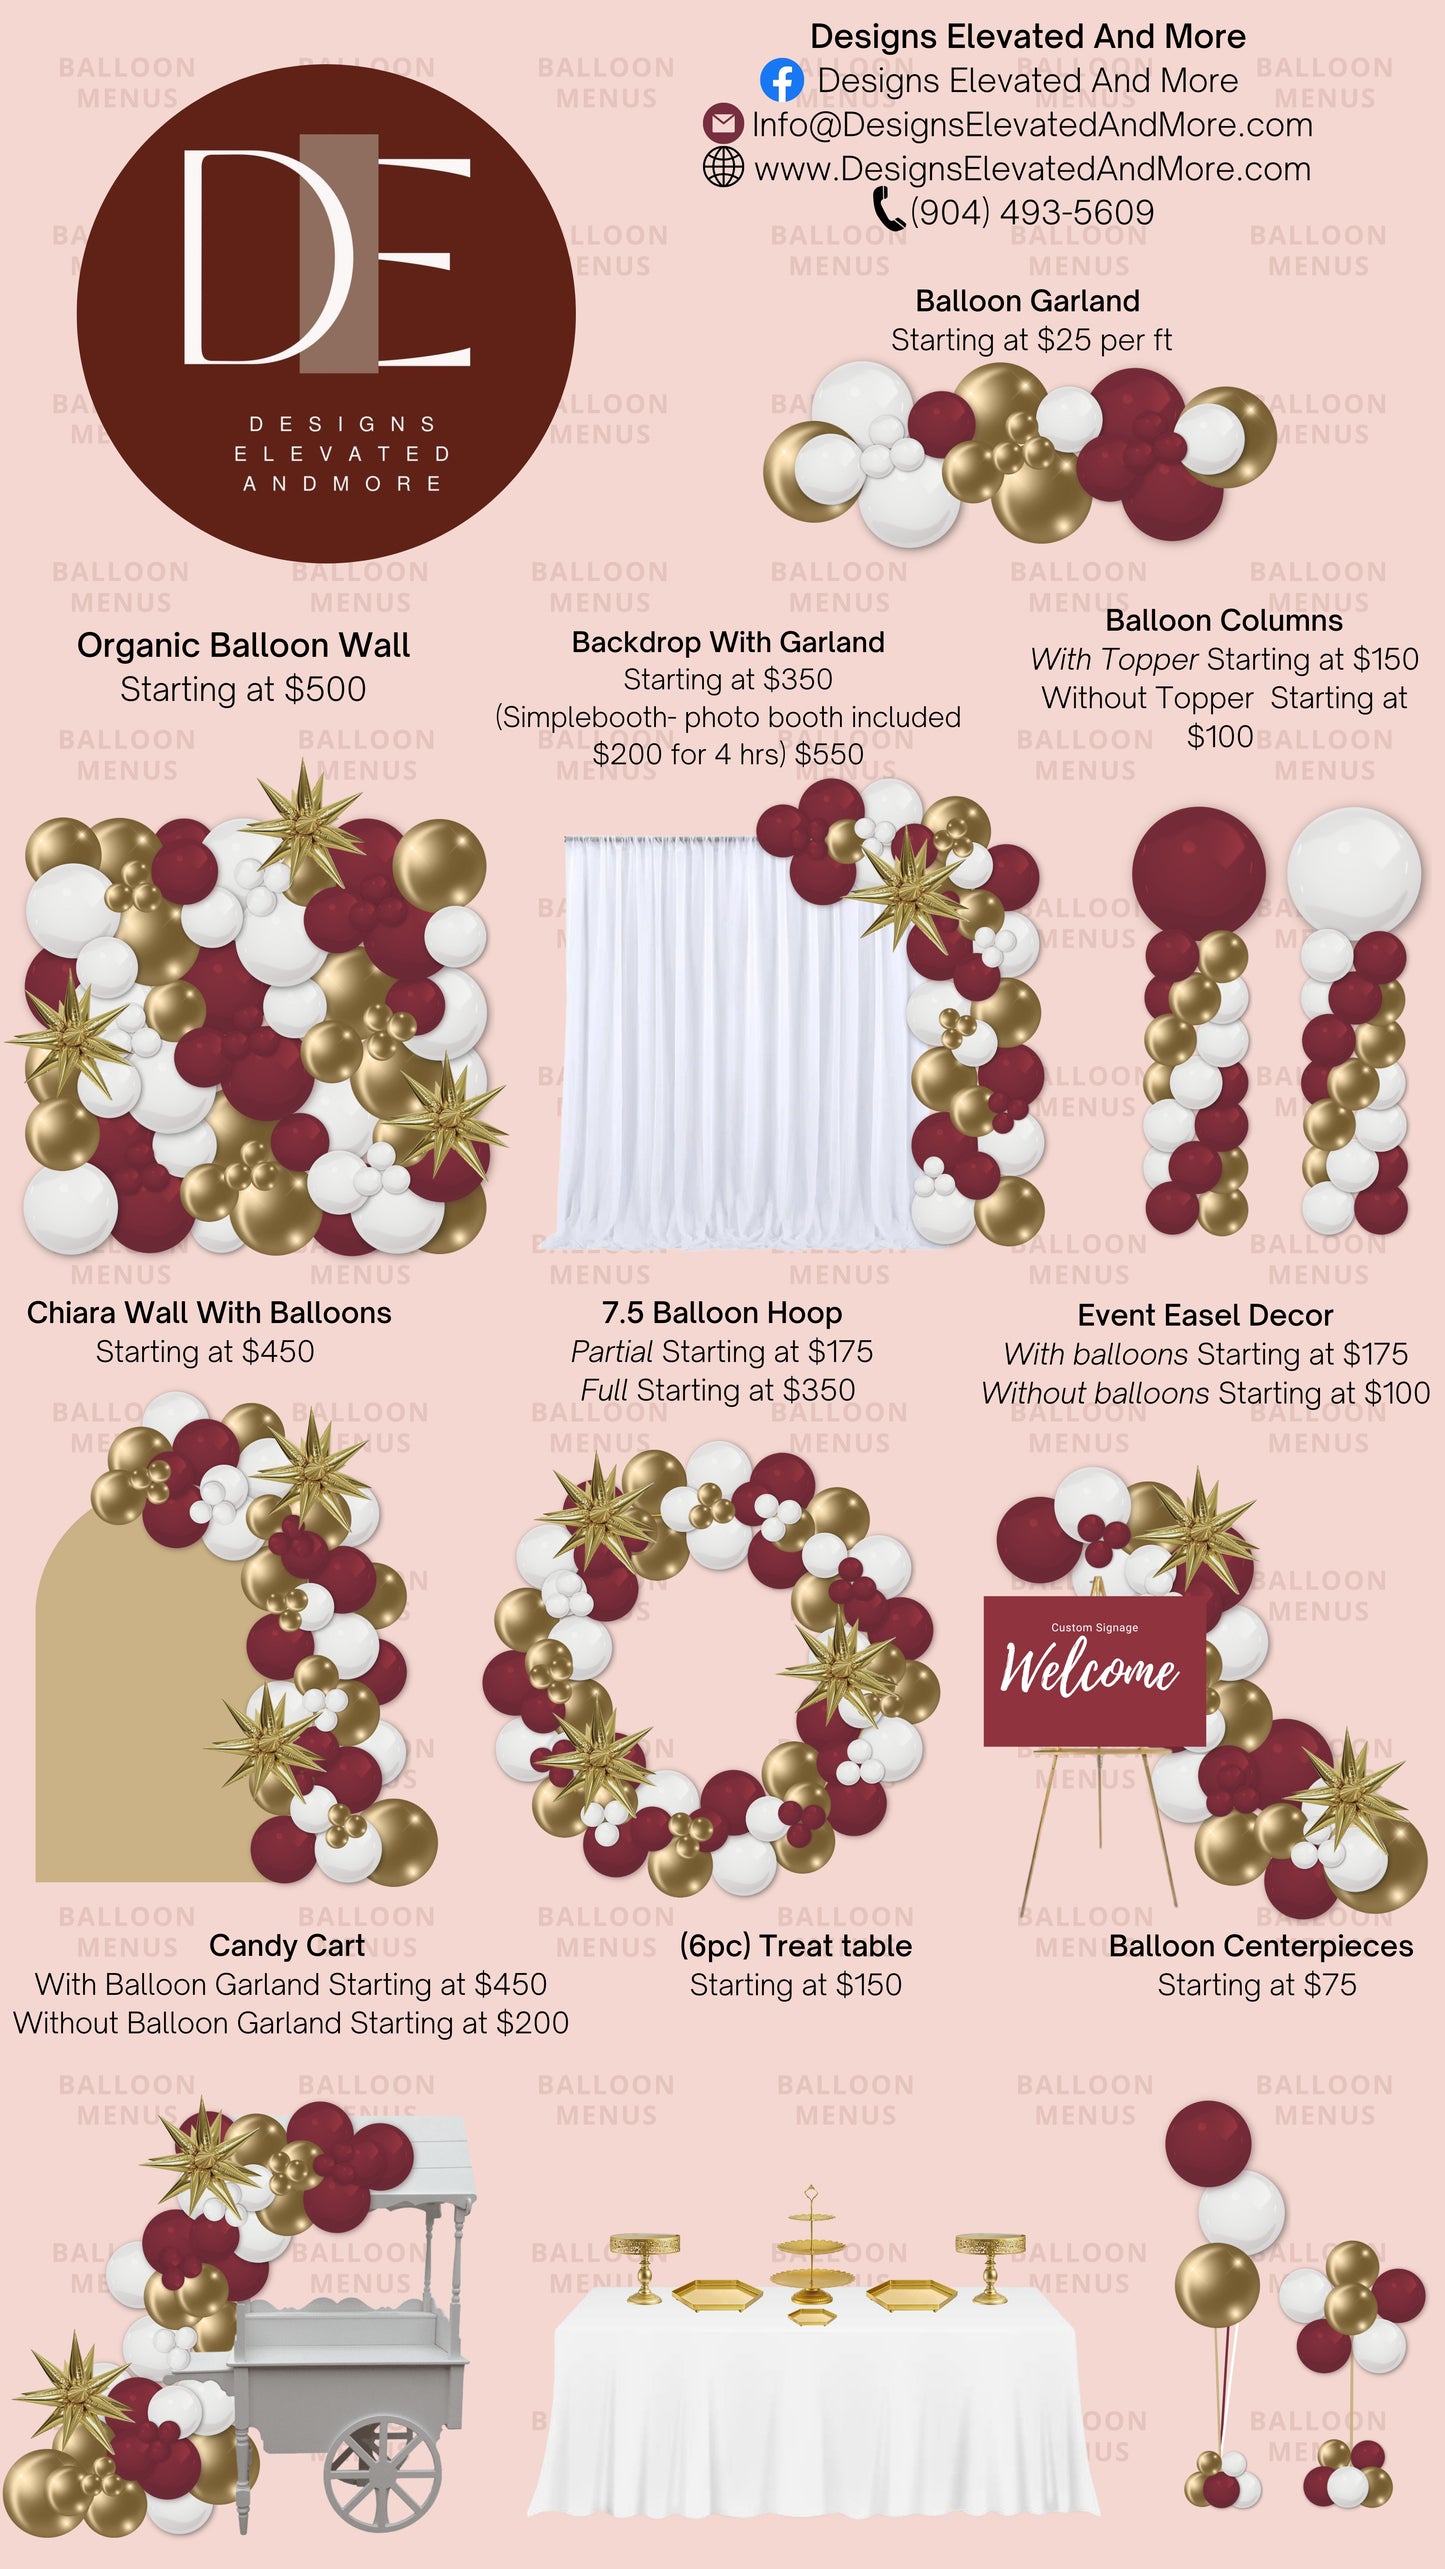 Designs Elevated and More- Client Balloon Menu